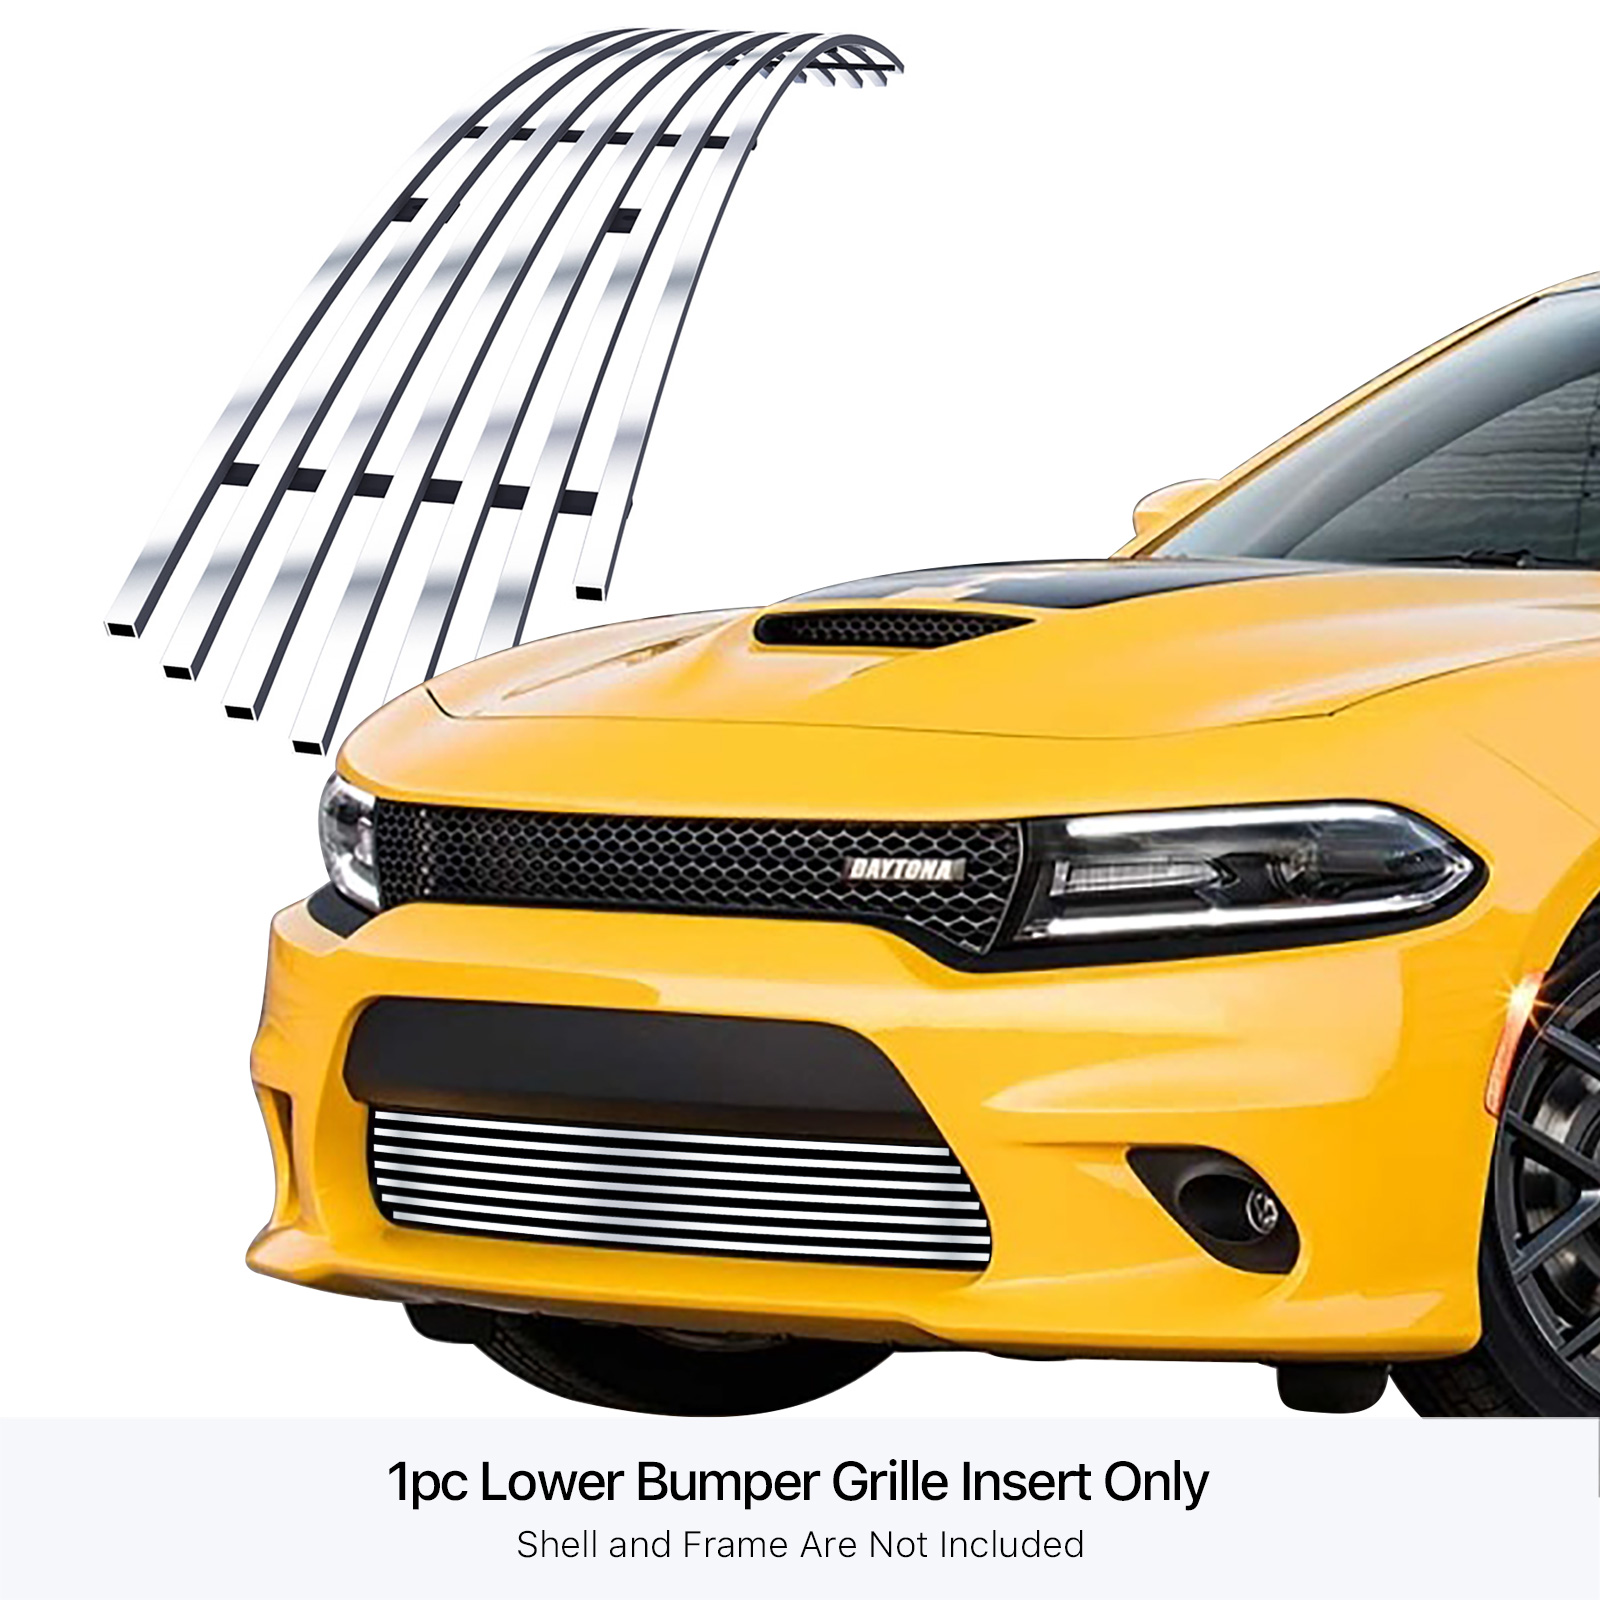 2015-2018 Dodge Charger Without Adaptive Cruise Control (Only for Daytona and RT SCAT pack and Daytona 392 and SRT 392 and SRT Hellcat) / 2019 Dodge Charger Without Adaptive Cruise Control (Only for GT and RT) LOWER BUMPER Stainless Steel Billet Grille